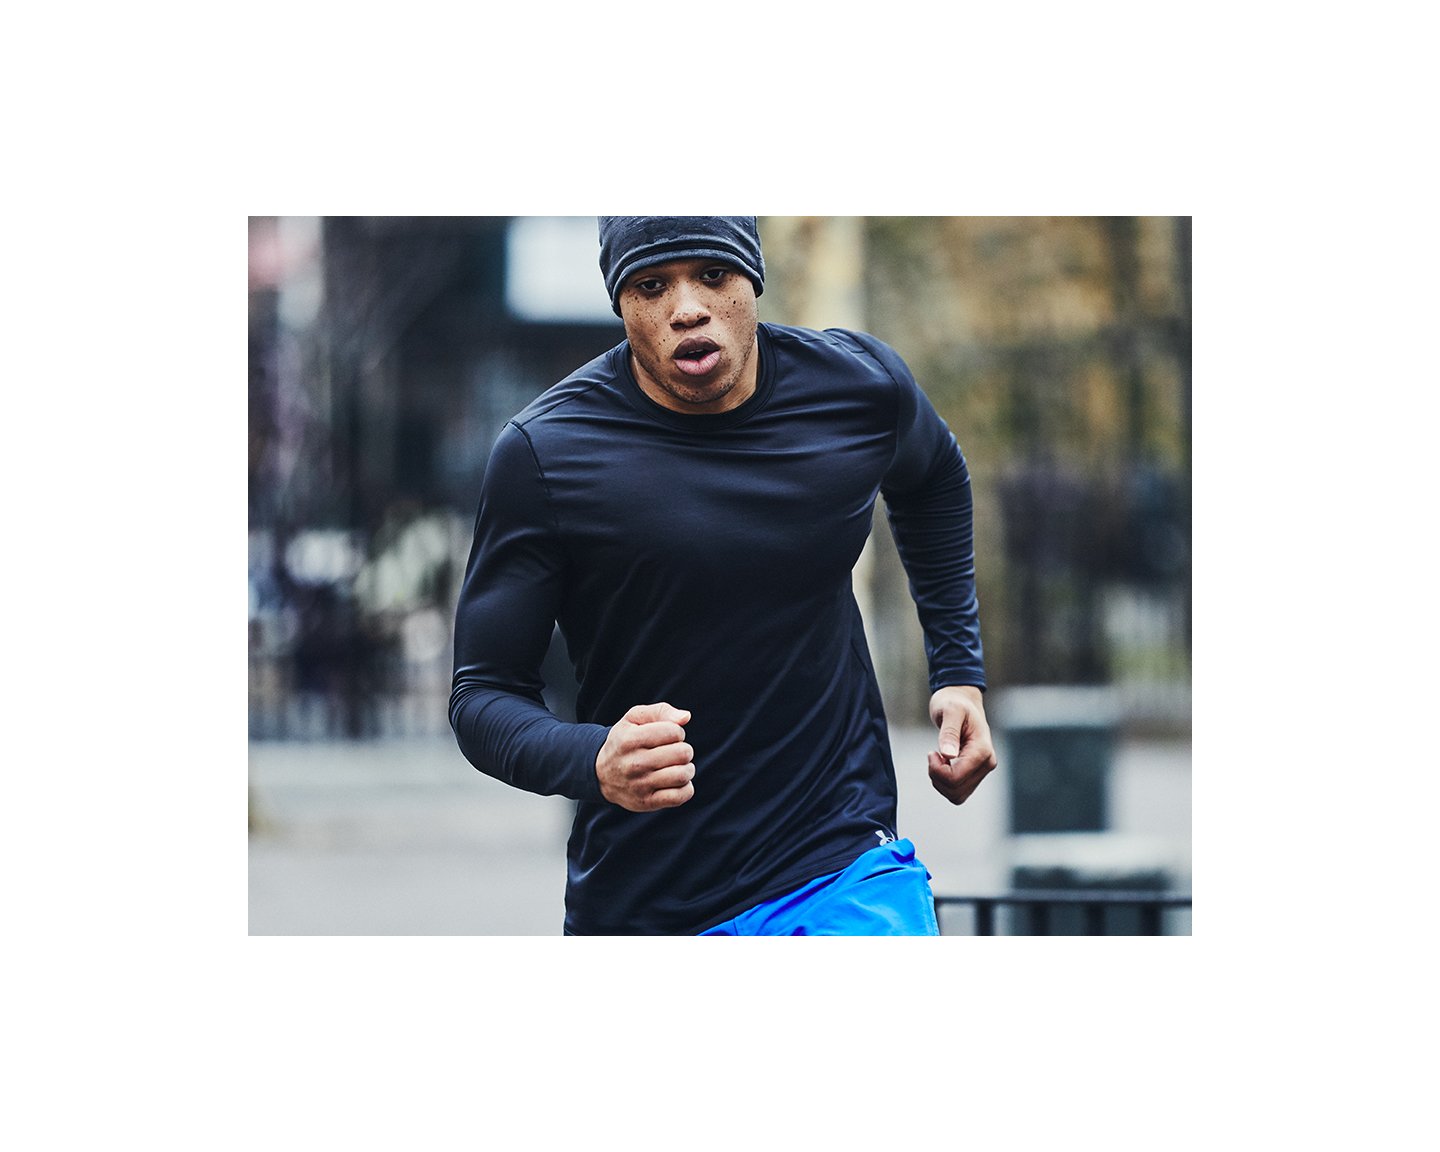 Winter & Cold Weather Running: What to Wear Guide